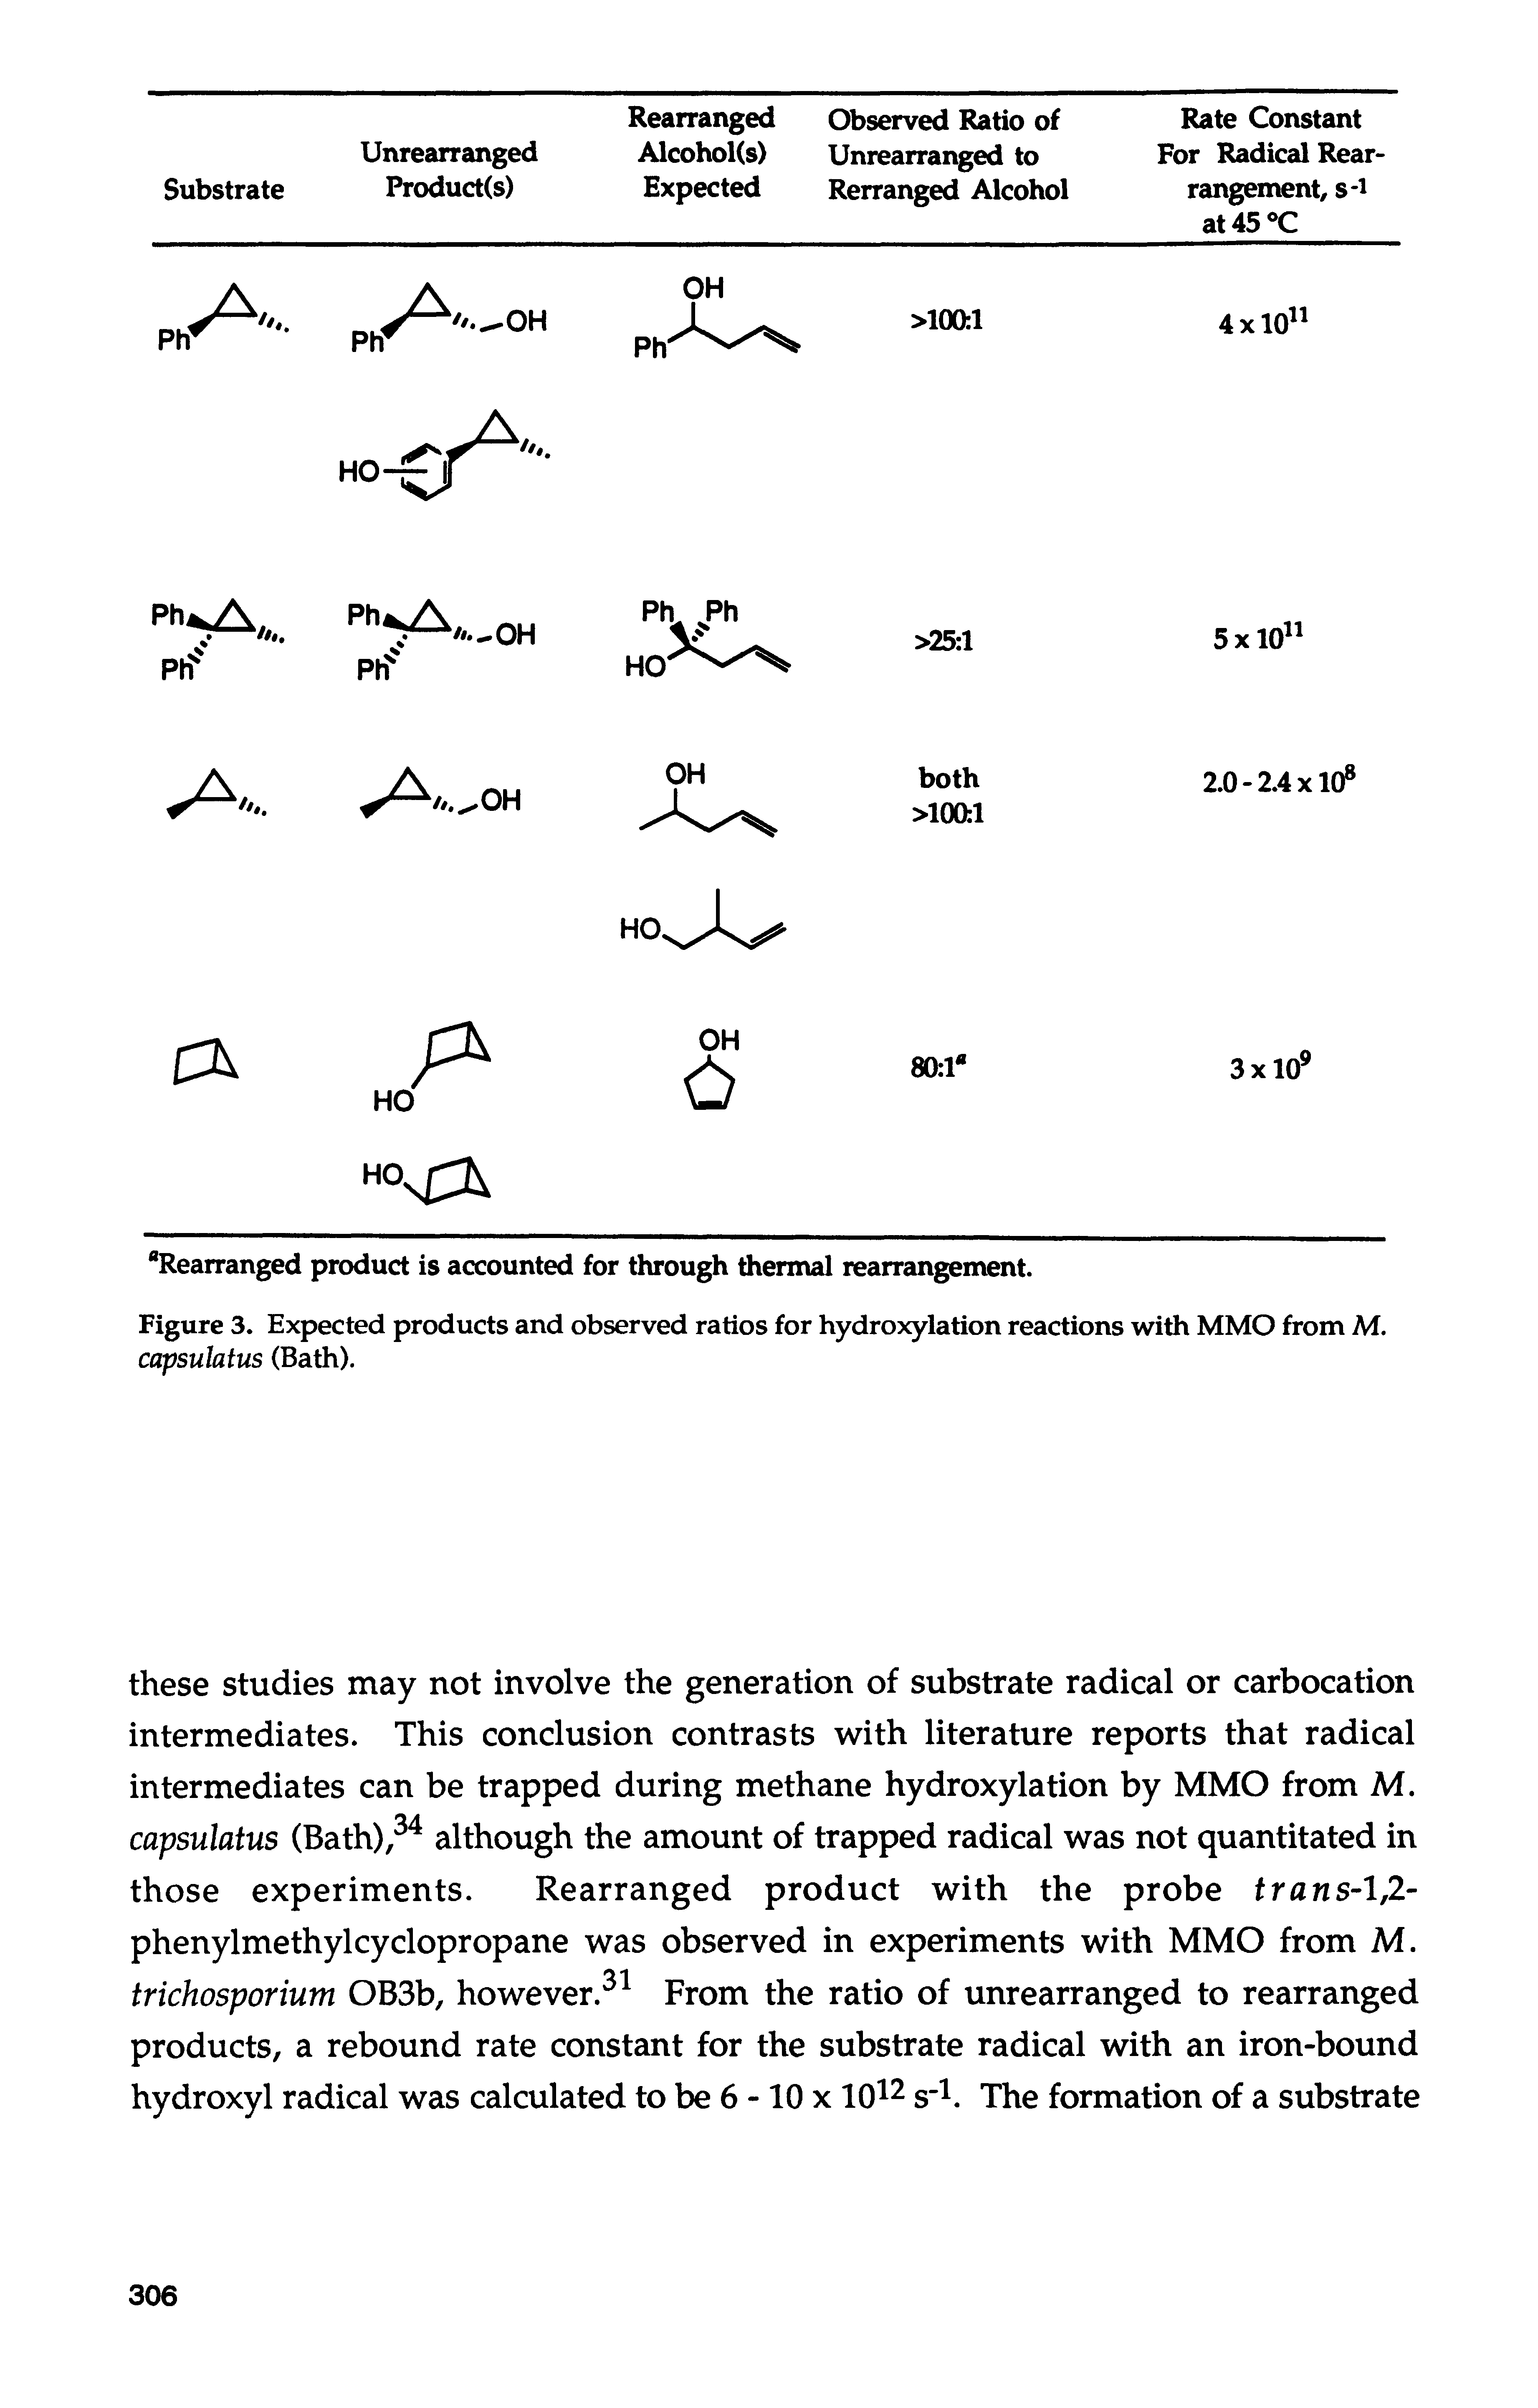 Figure 3. Expected products and observed ratios for hydroxylation reactions with MMO from M. capsulatus (Bath).